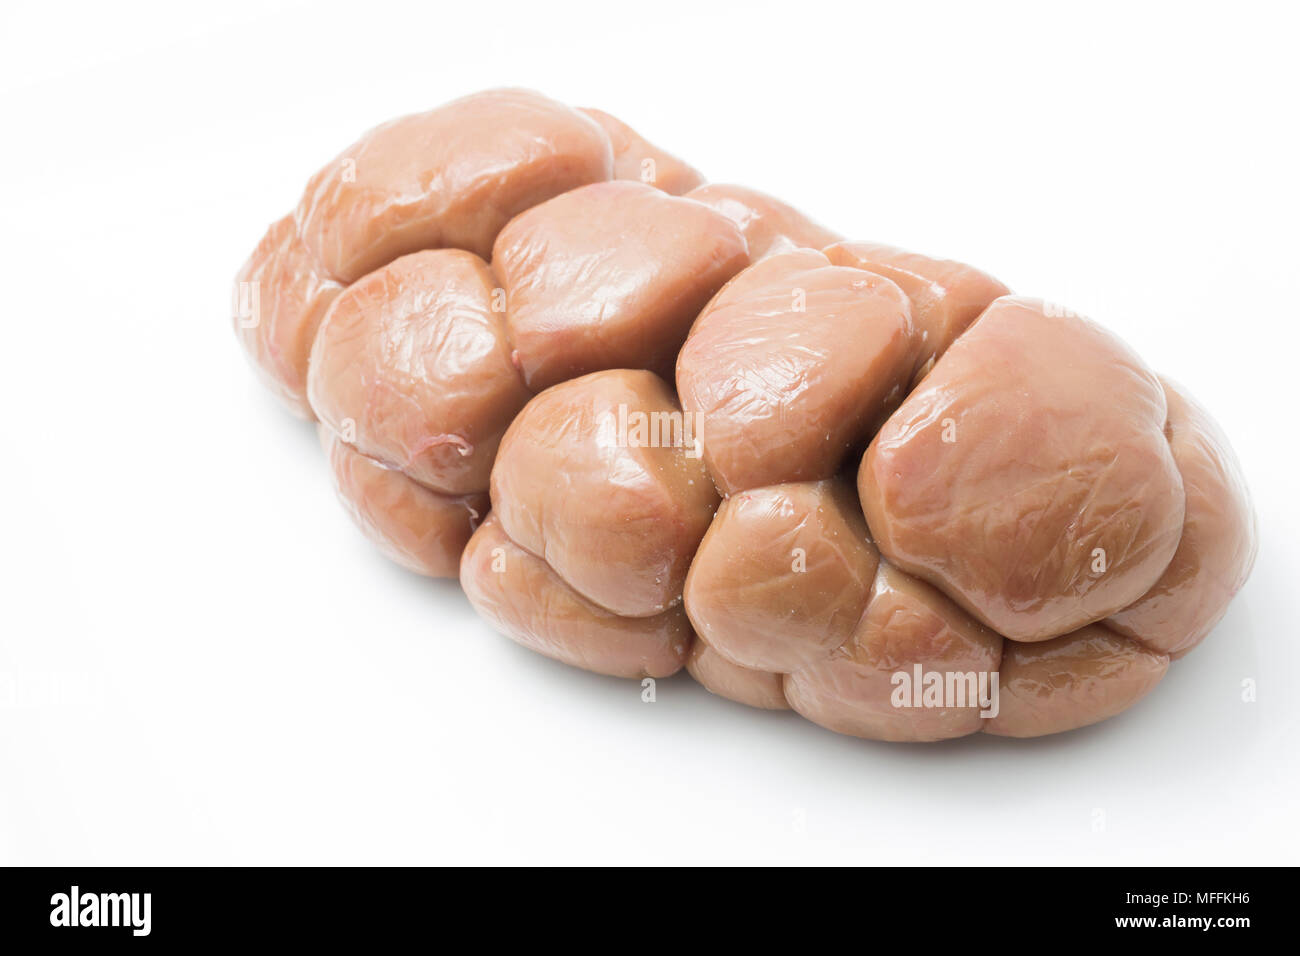 An ox kidney bought from a supermarket in England UK. On a white background. Stock Photo